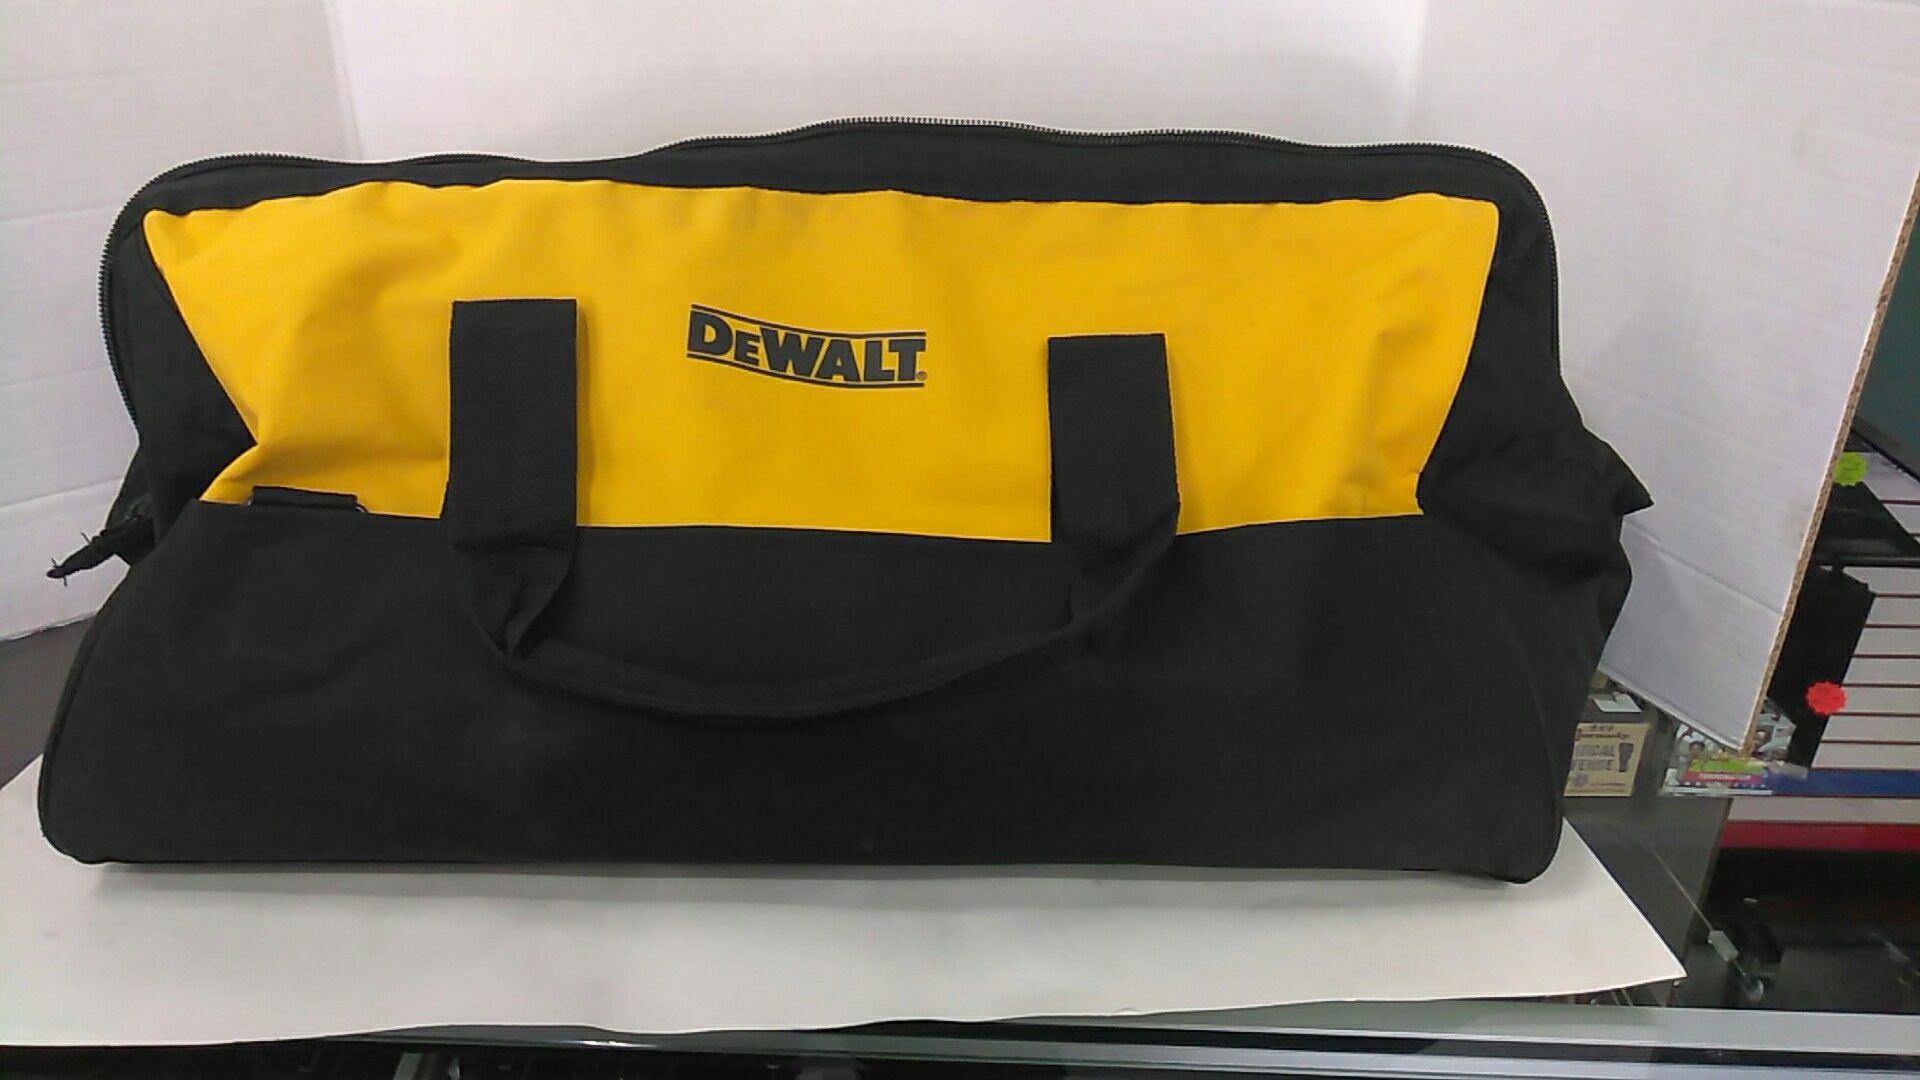 DeWalt combo 6 tool brand new in the water bag no box never used